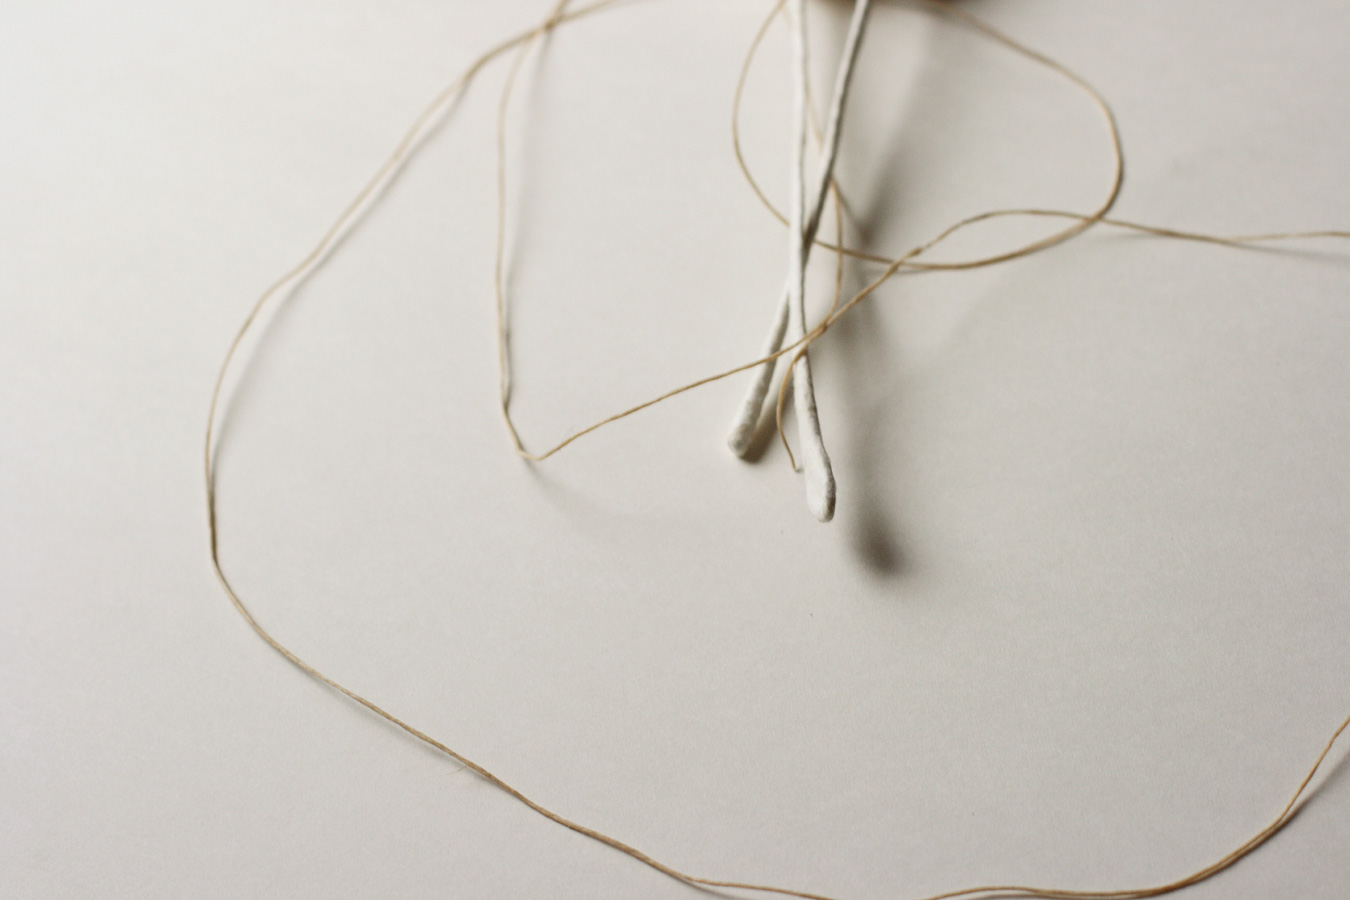 A Love Story, 2008. waxed thread through paper over wire. 22.5 x 3 cm together